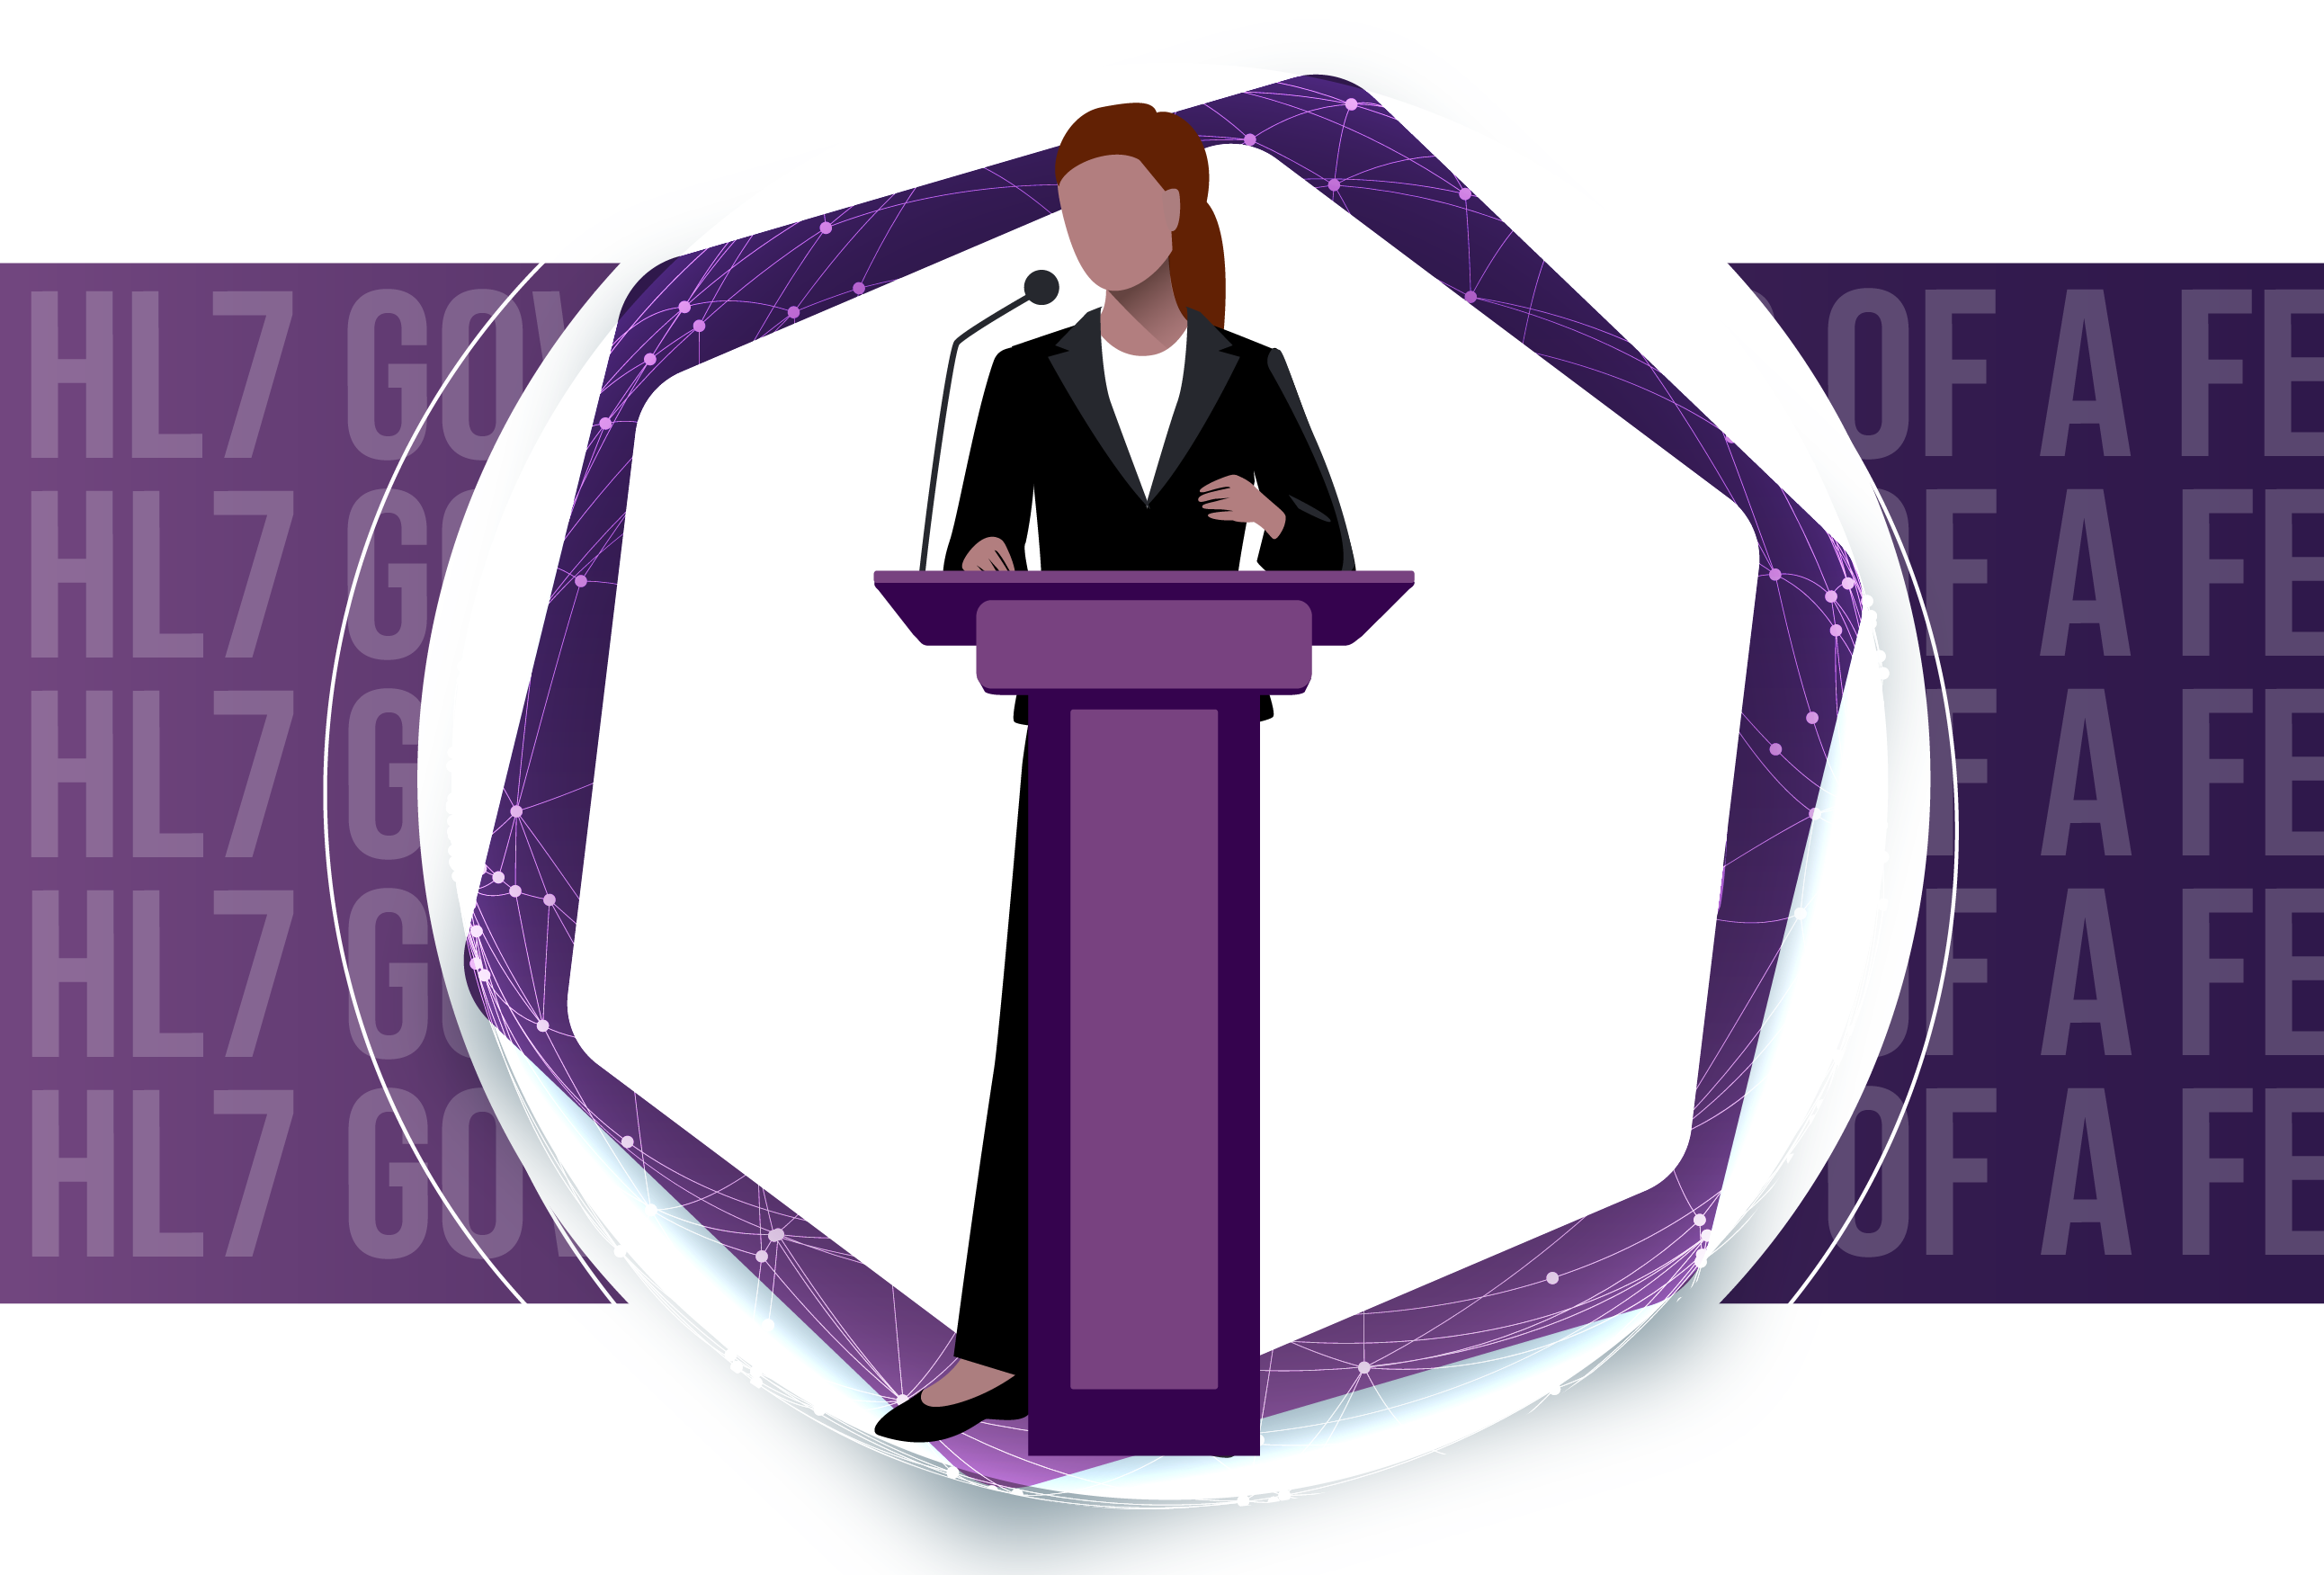 Illustration of a woman standing and speaking at a podium